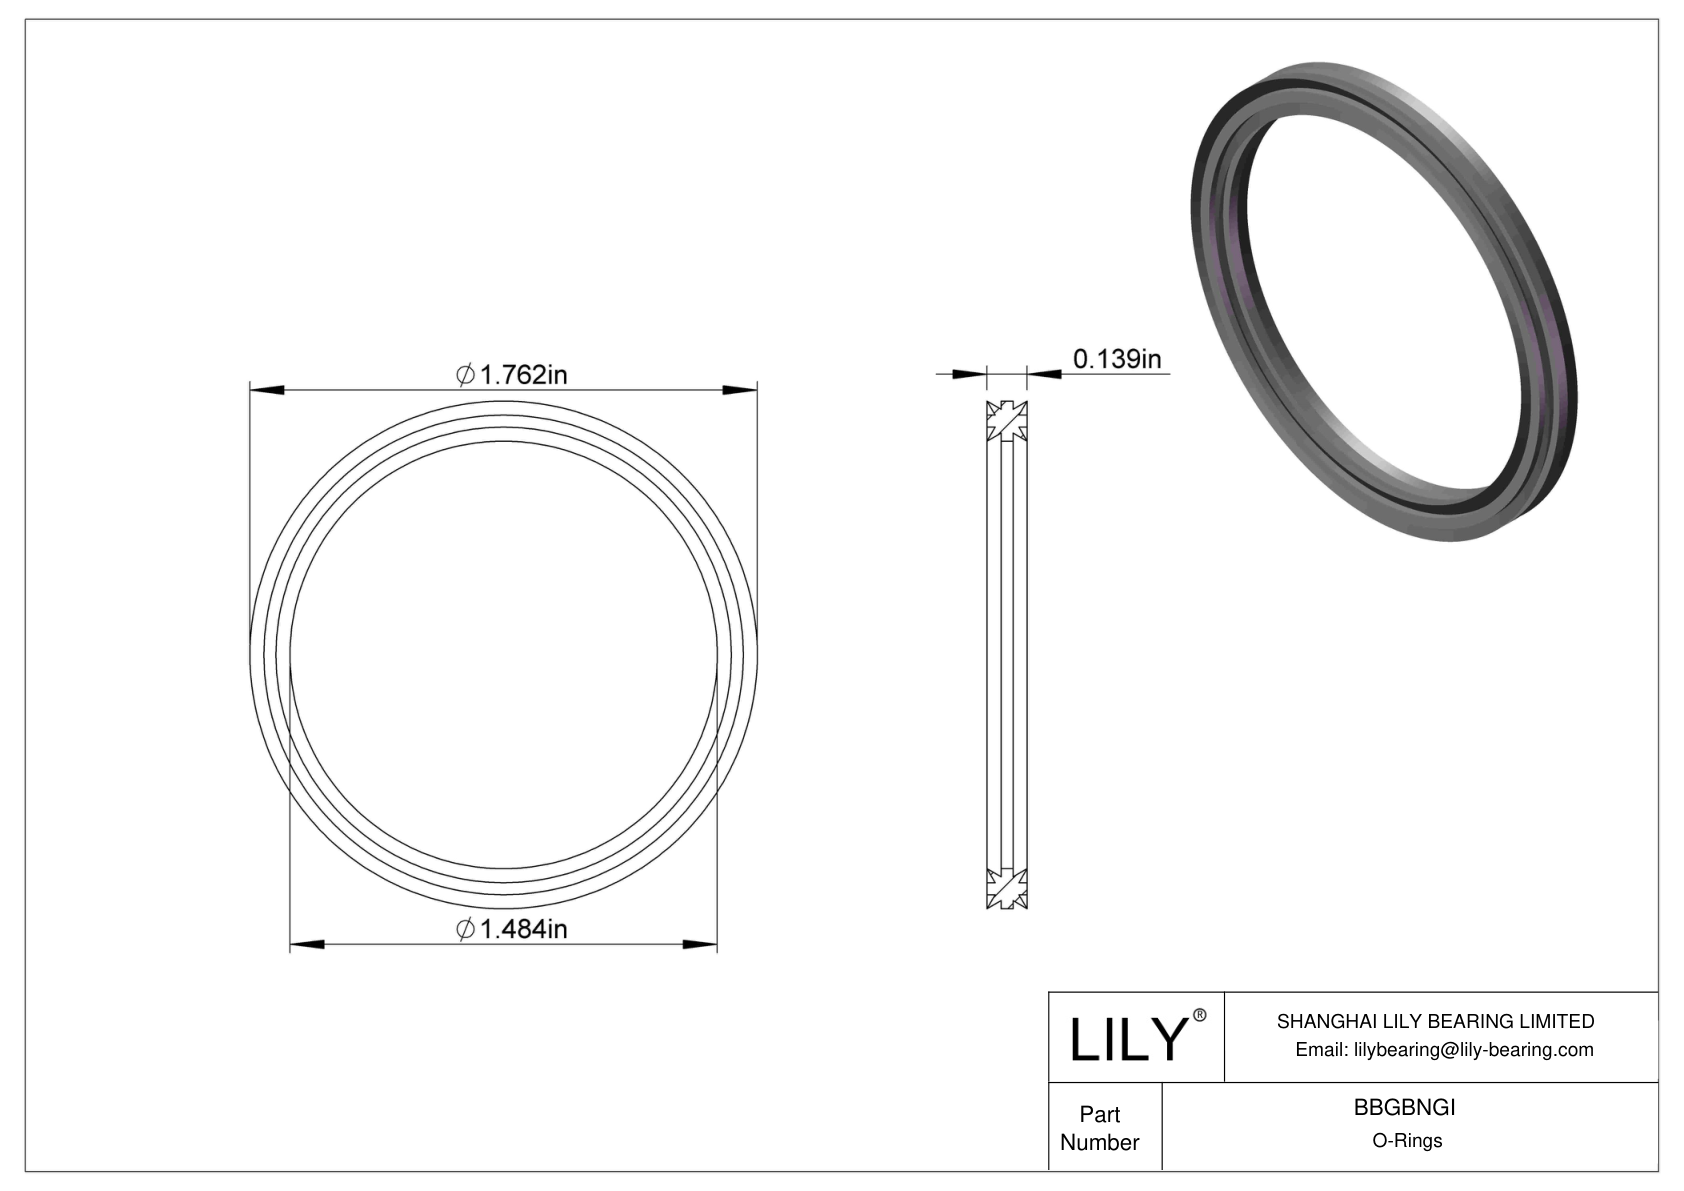 BBGBNGI Oil Resistant O-Rings Double X cad drawing